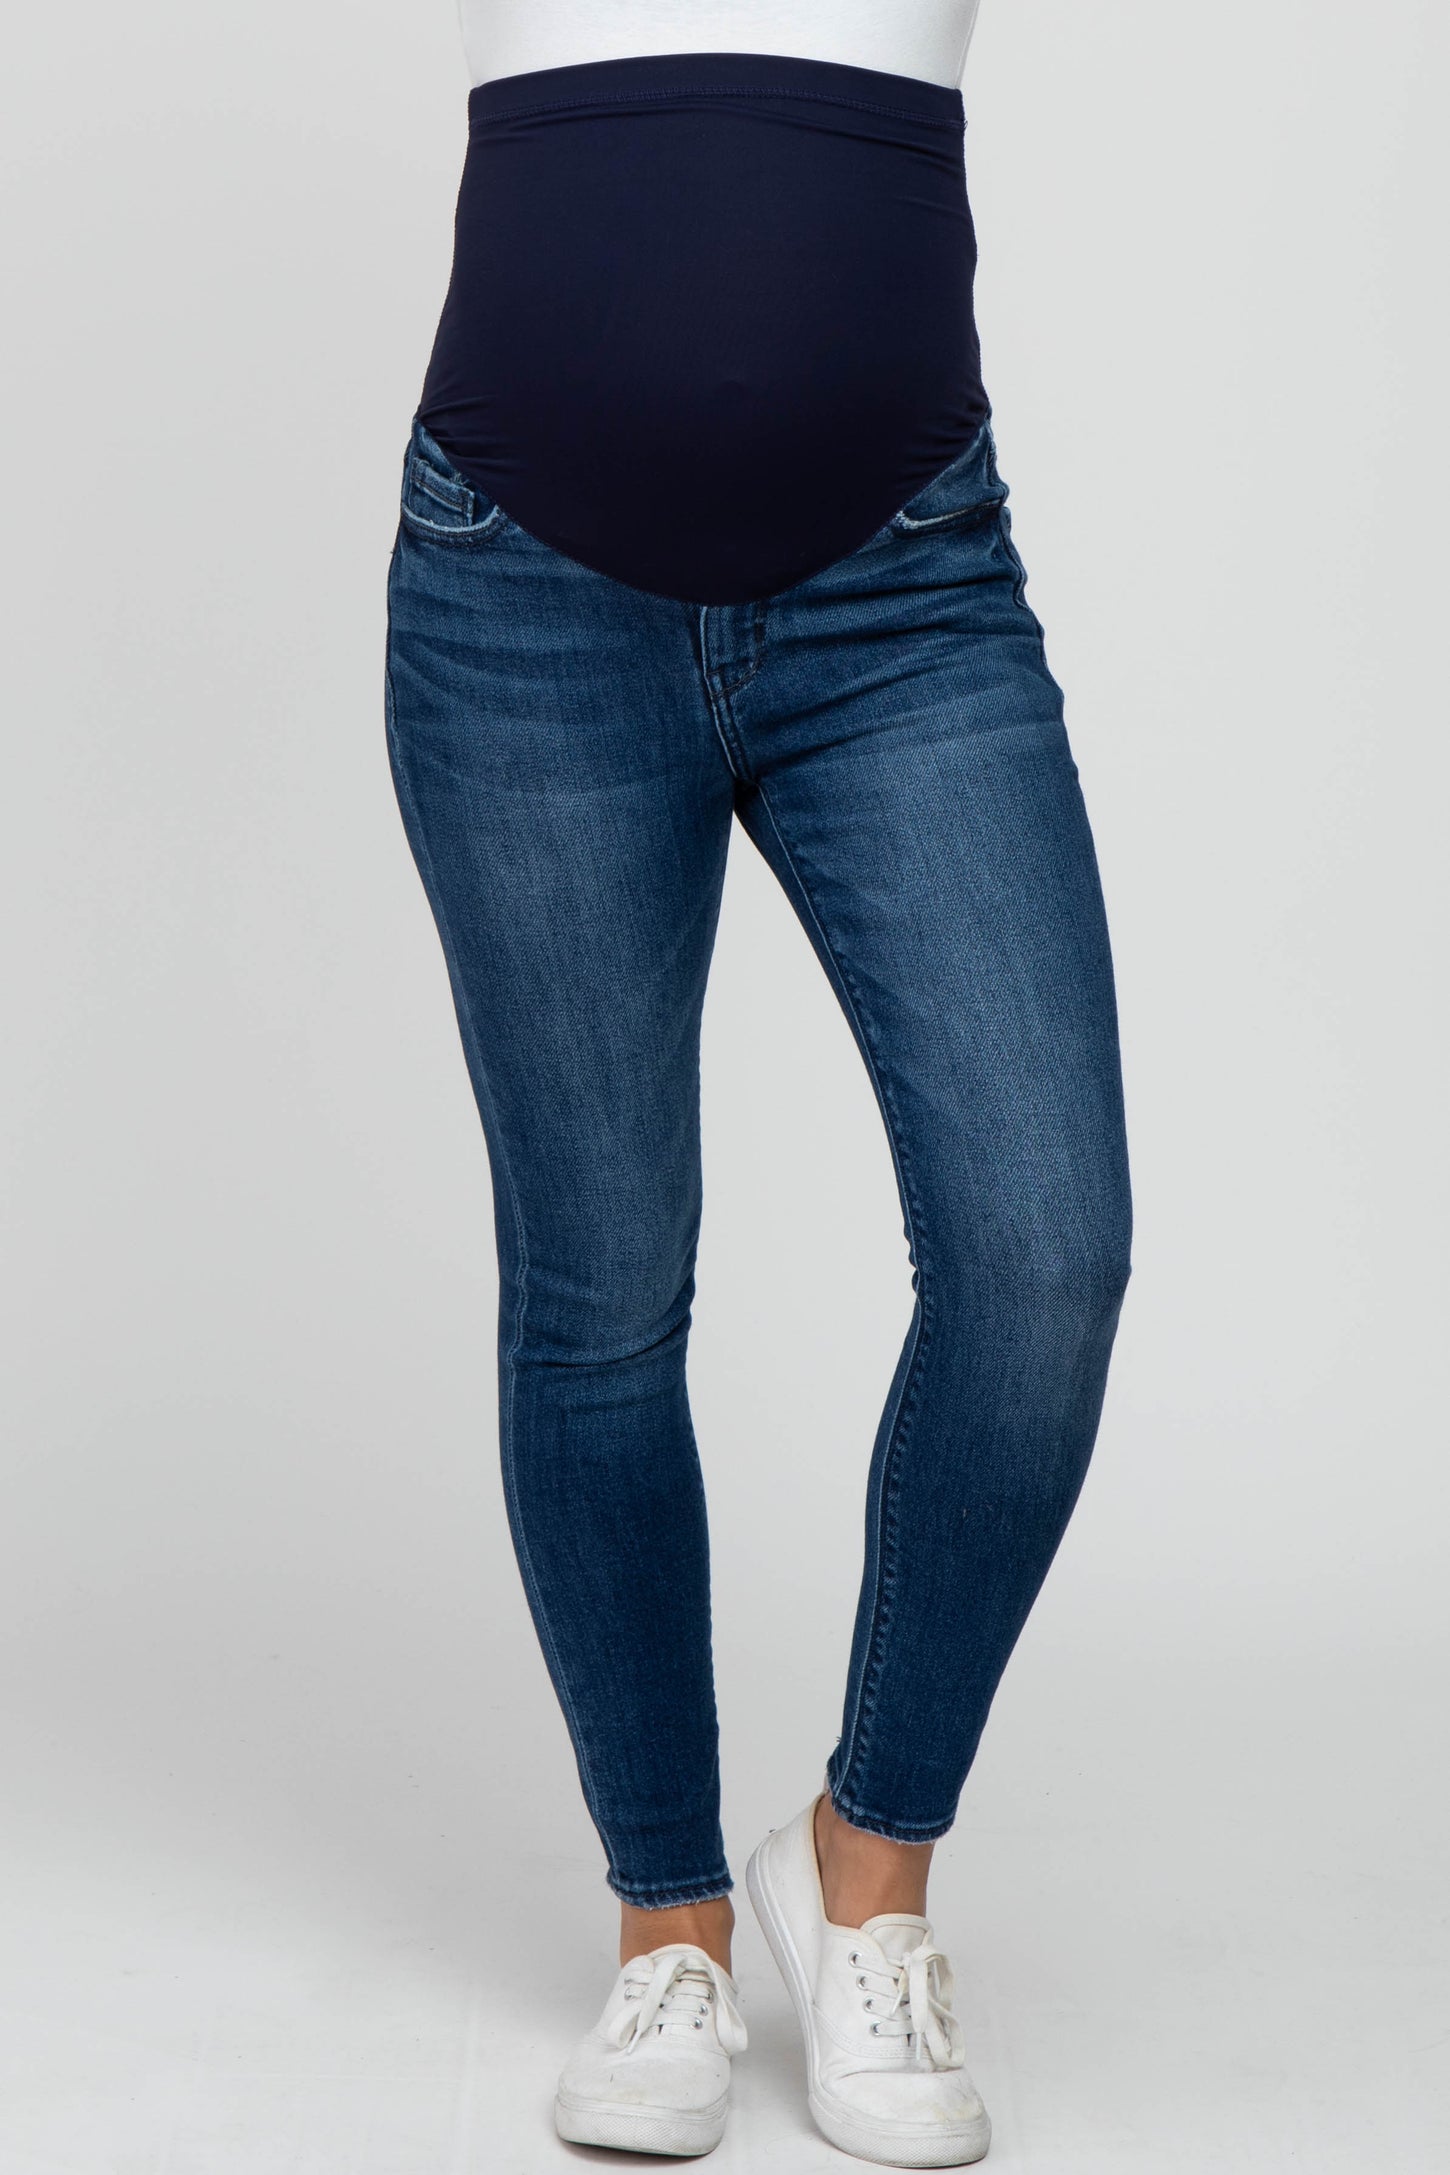 Best Places to Find Maternity Jeans (Rated by Readers)